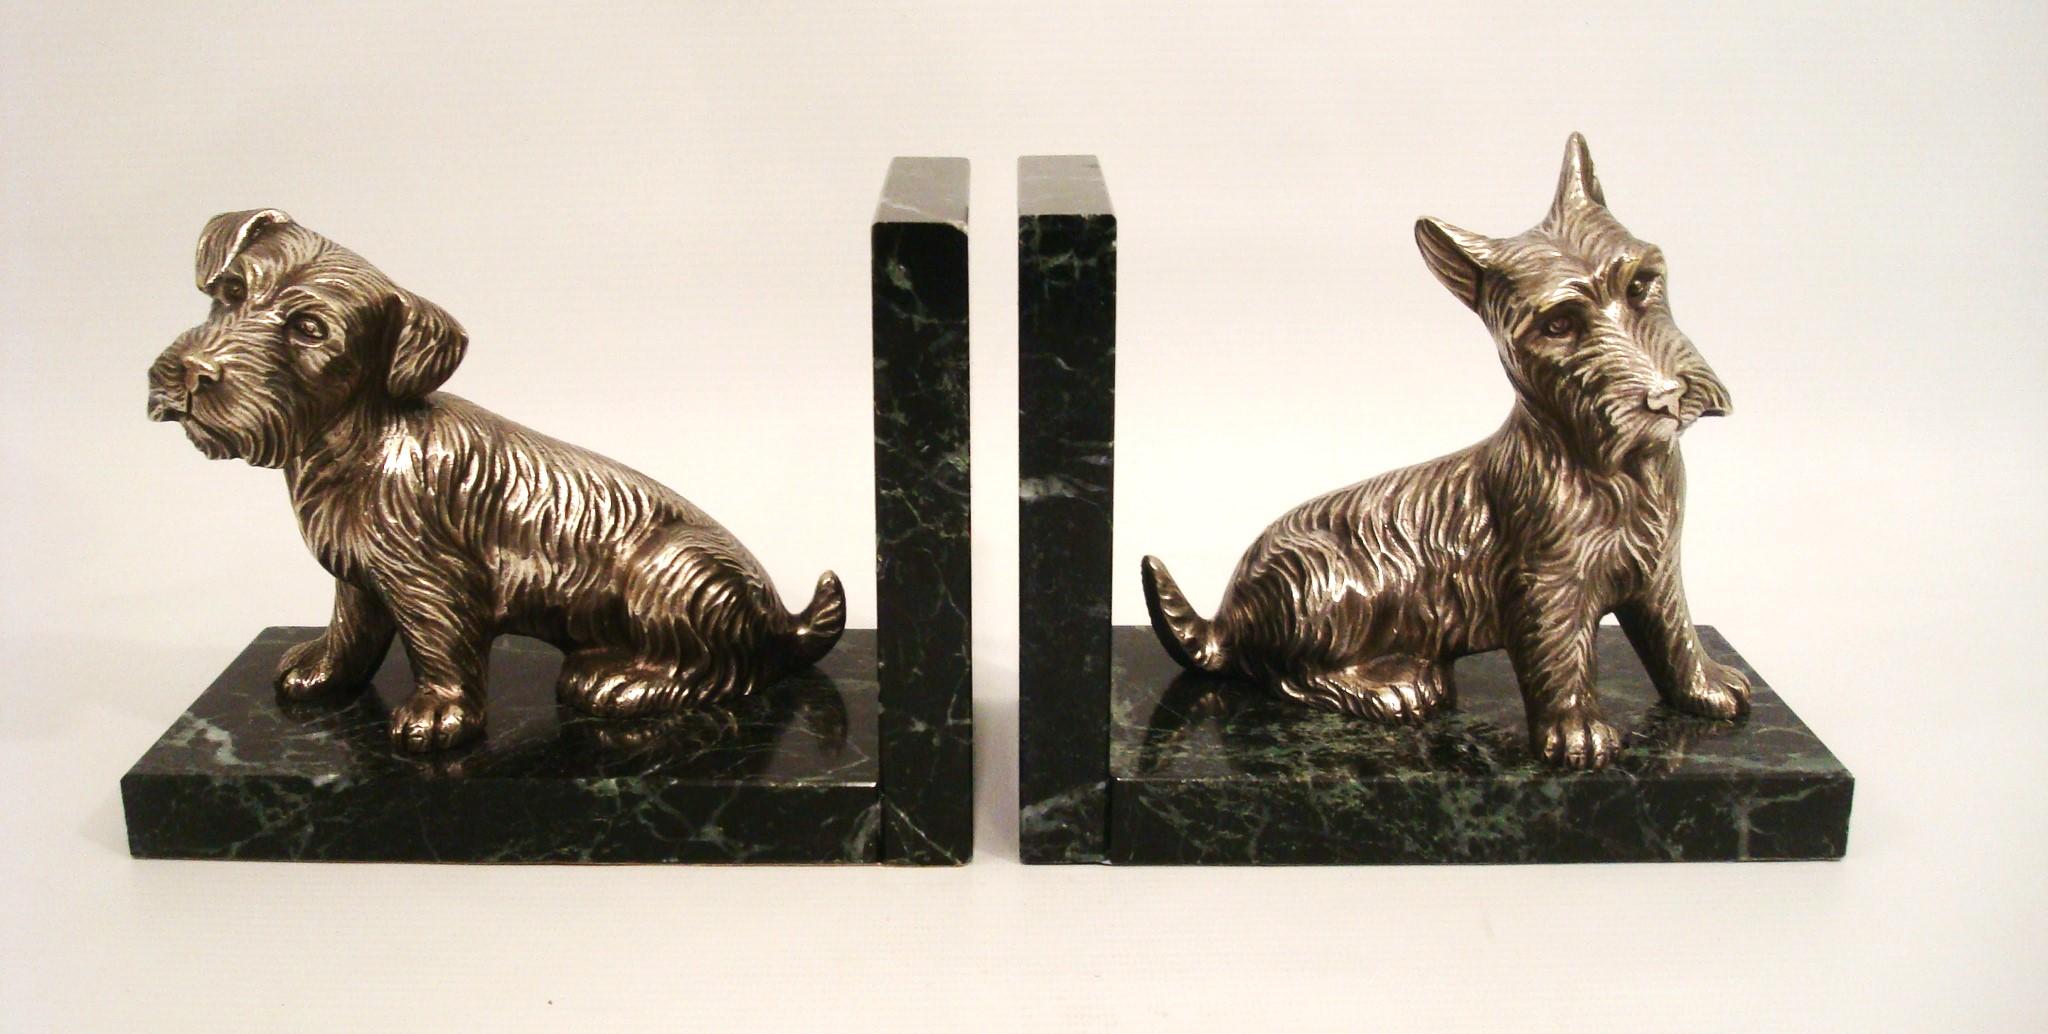 This is a set of Art Deco bookends featuring Scottish Terriers. The Scottie is very detailed and the silvered bronze patina is a great. The base is a dark green marble that just makes those dogs 